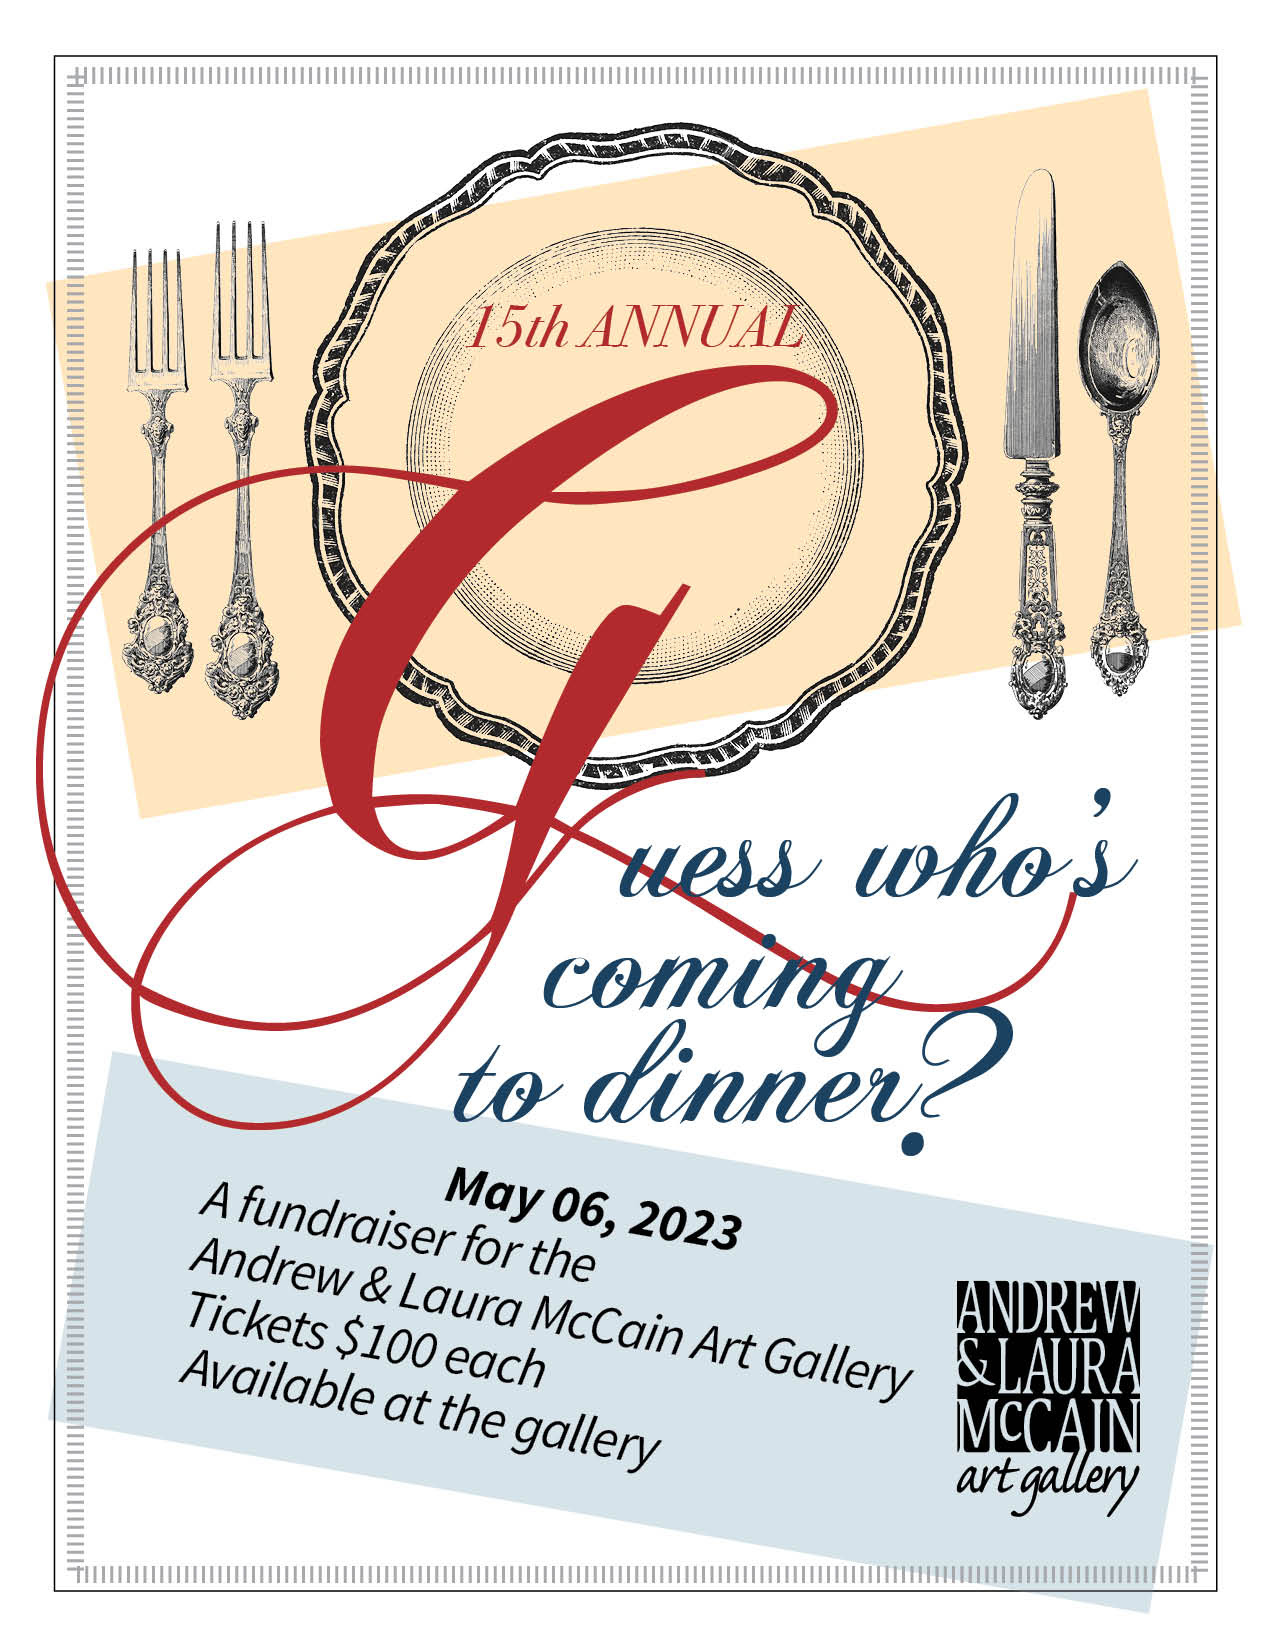 15th Annual Guess Who's Coming to Dinner. May 6, 2023, a fundraiser for the Andrew and Laura McCain Art Gallery. Tickets $100 each, available at the gallery